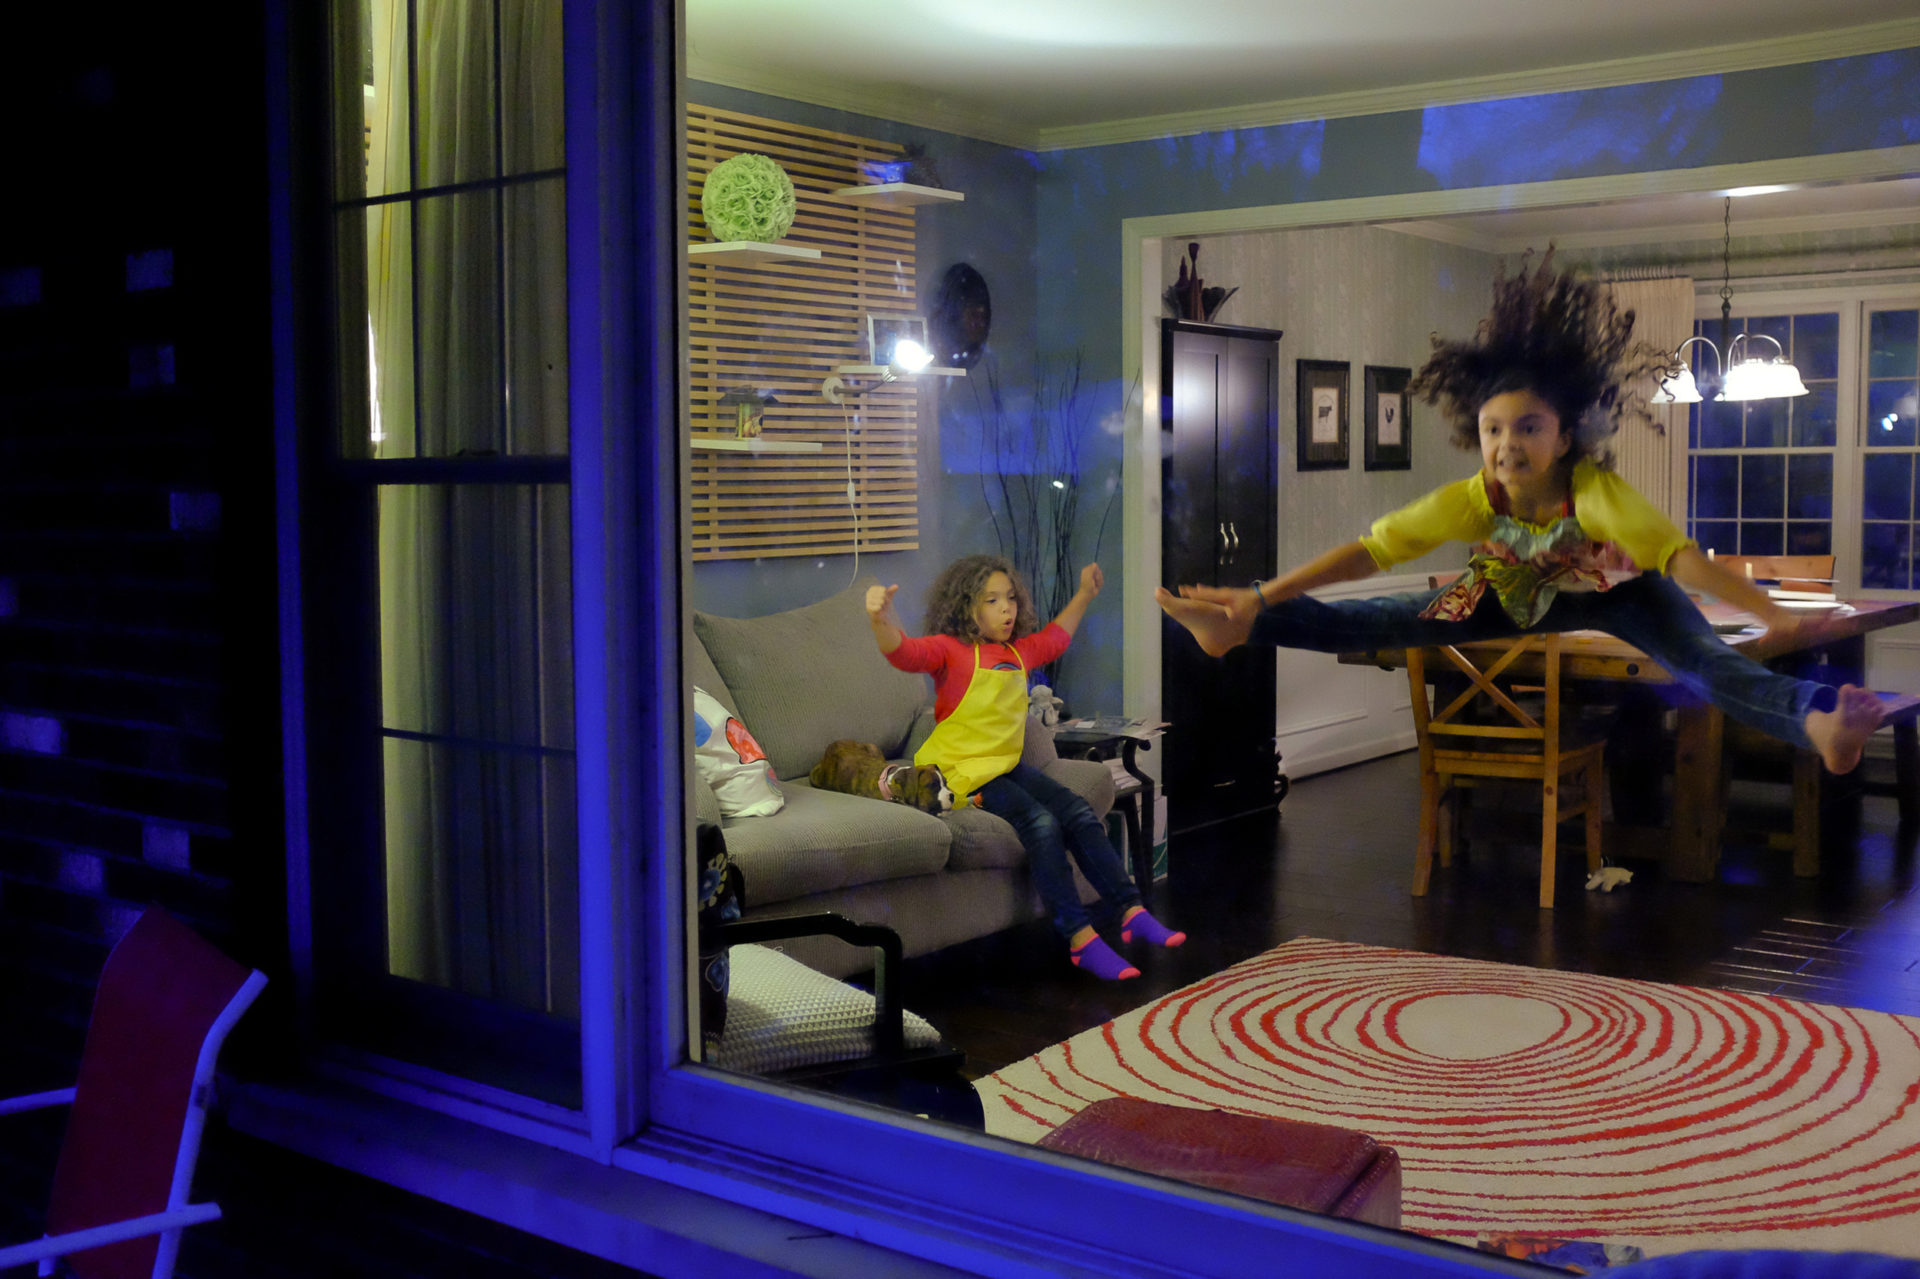 Two young girls can be seen playing in a home through a front window